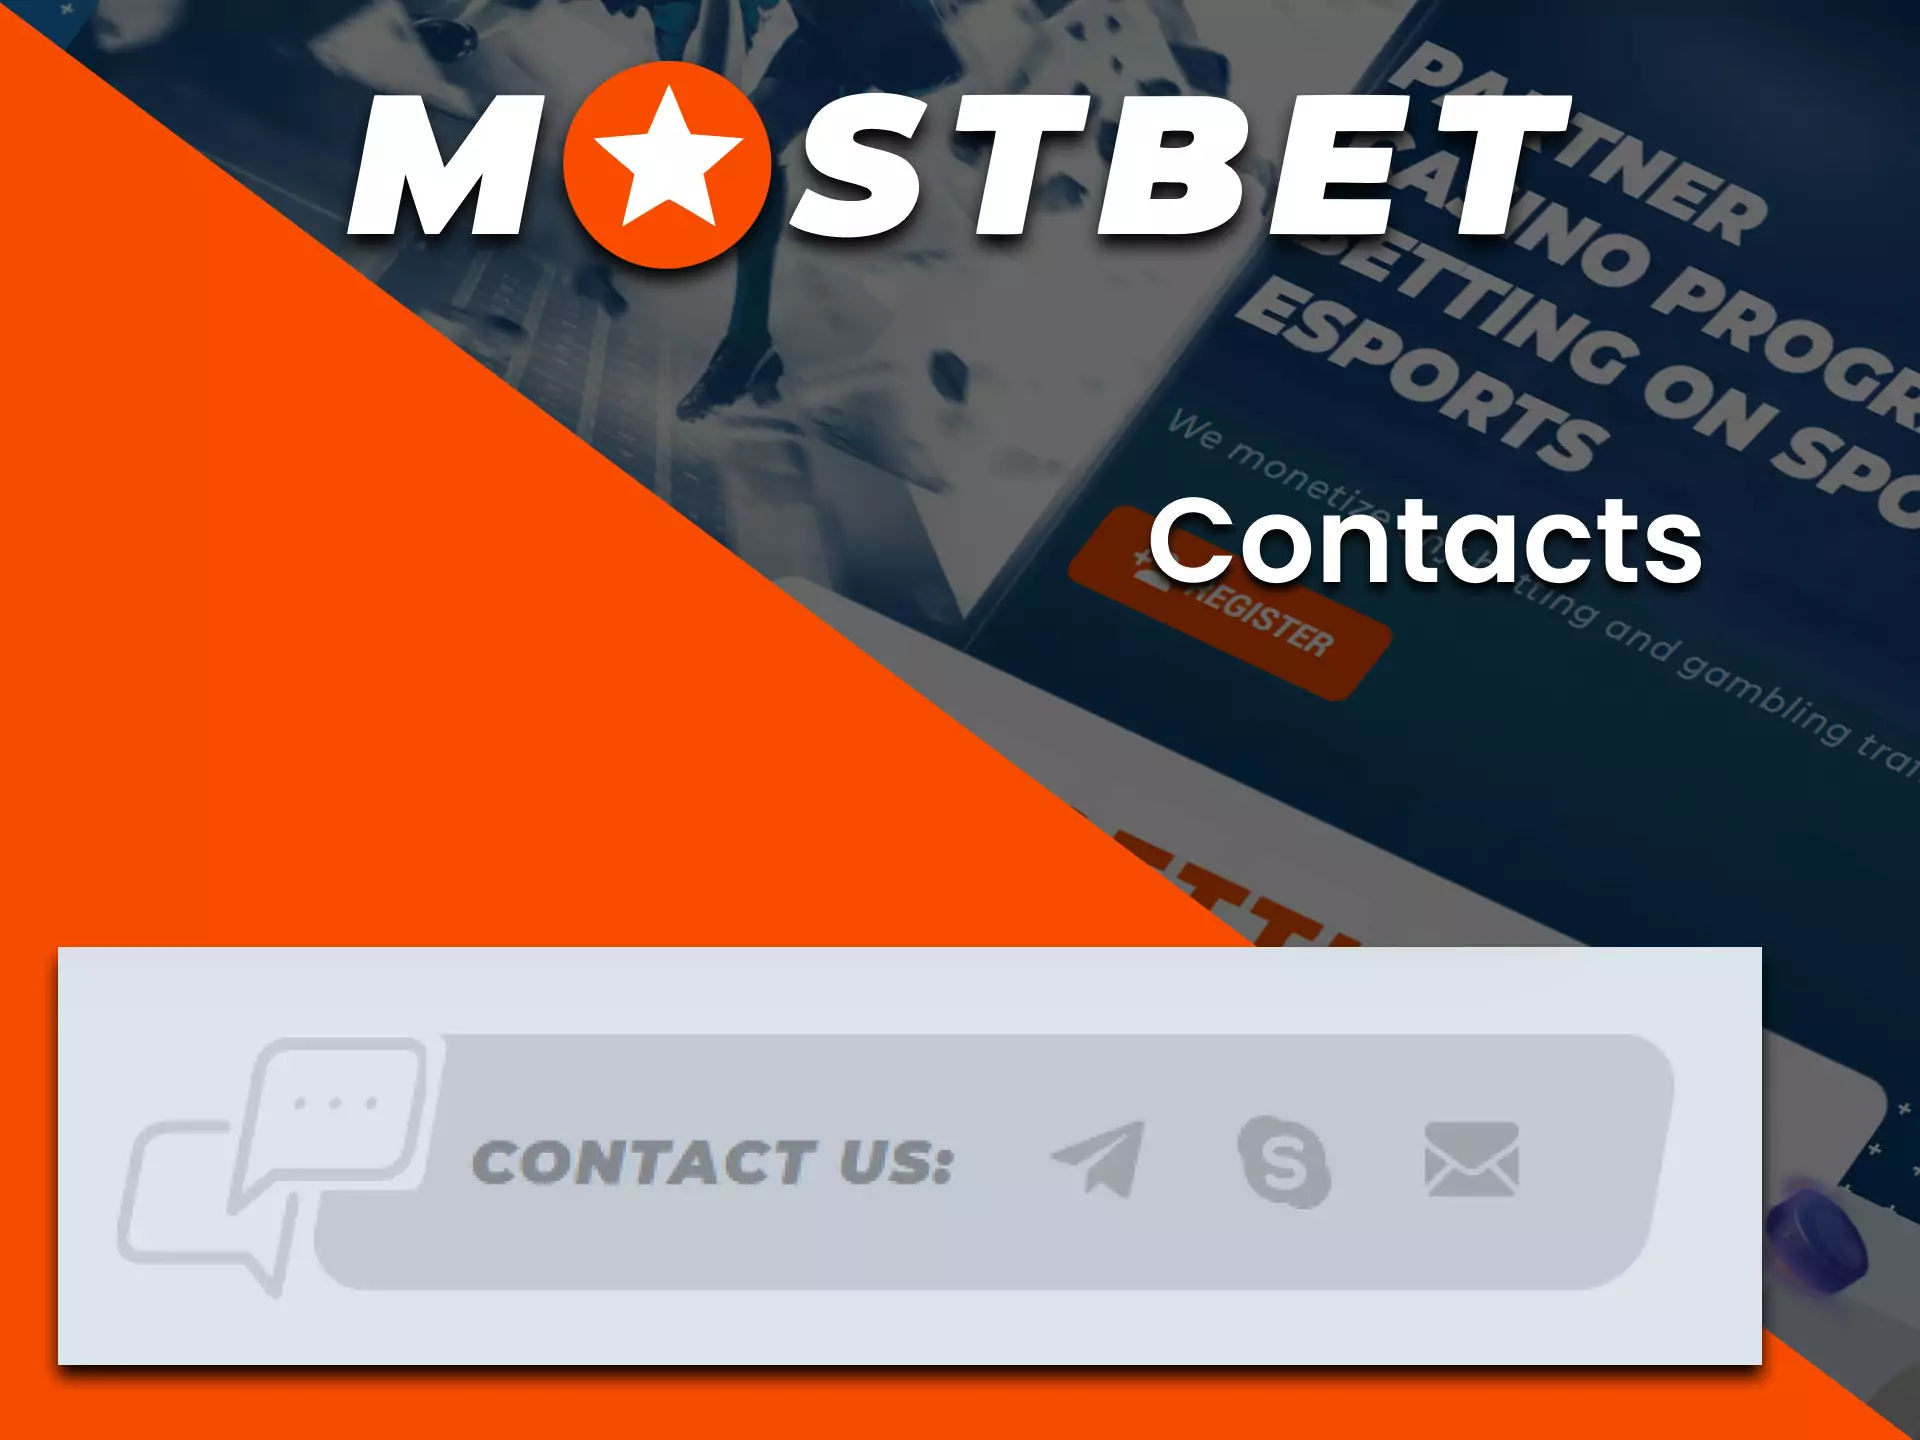 Contact the Mostbet support team if you have questions about the program.